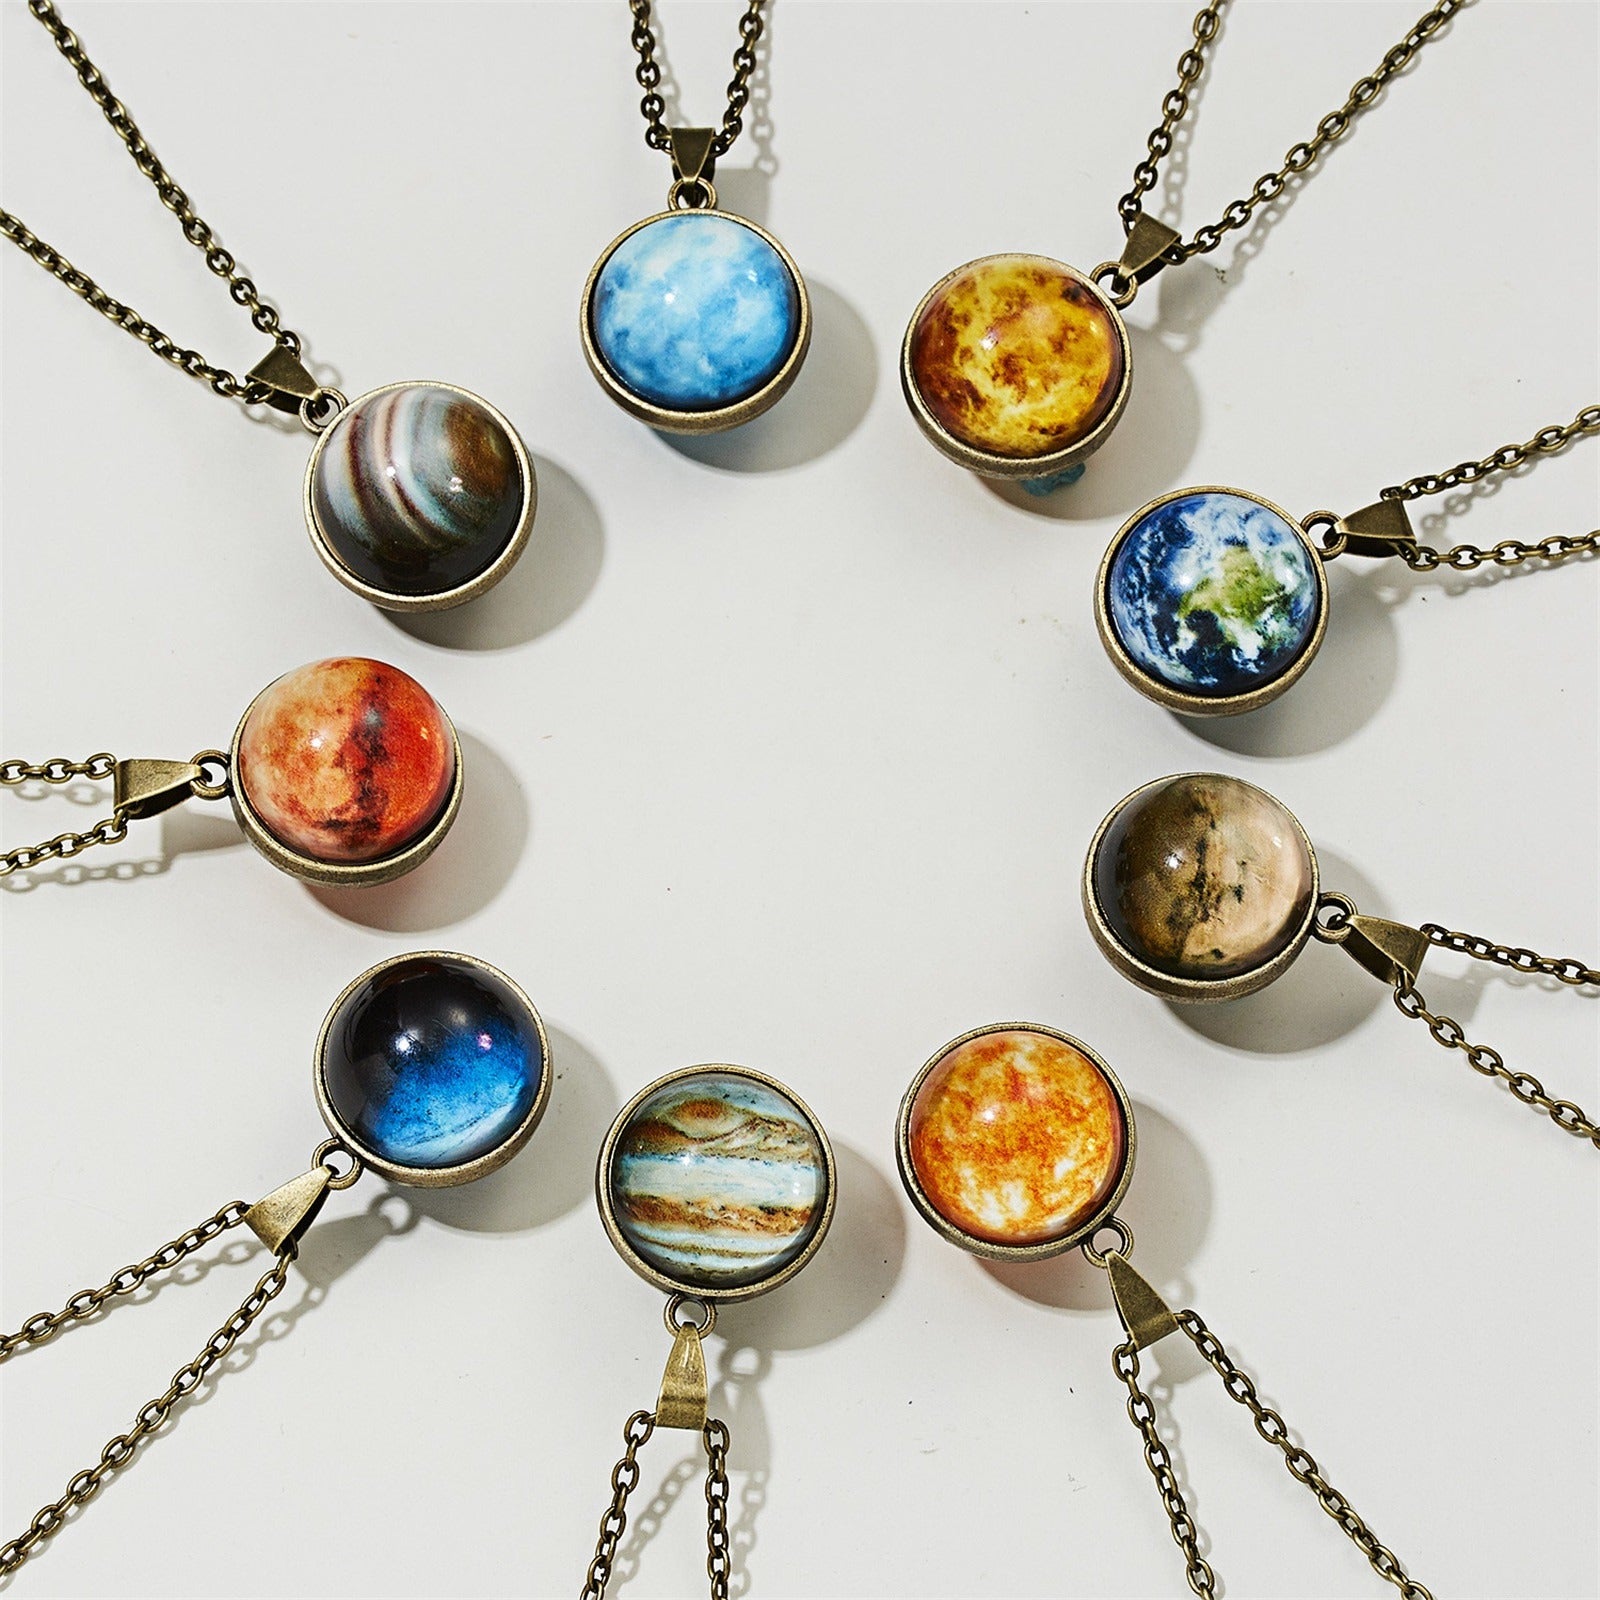 Cheeky Geek Stargazer Glow-In-The-Dark Planet Pendant - Small round glass pendants with images of different planets in the middle, which glow in the dark.